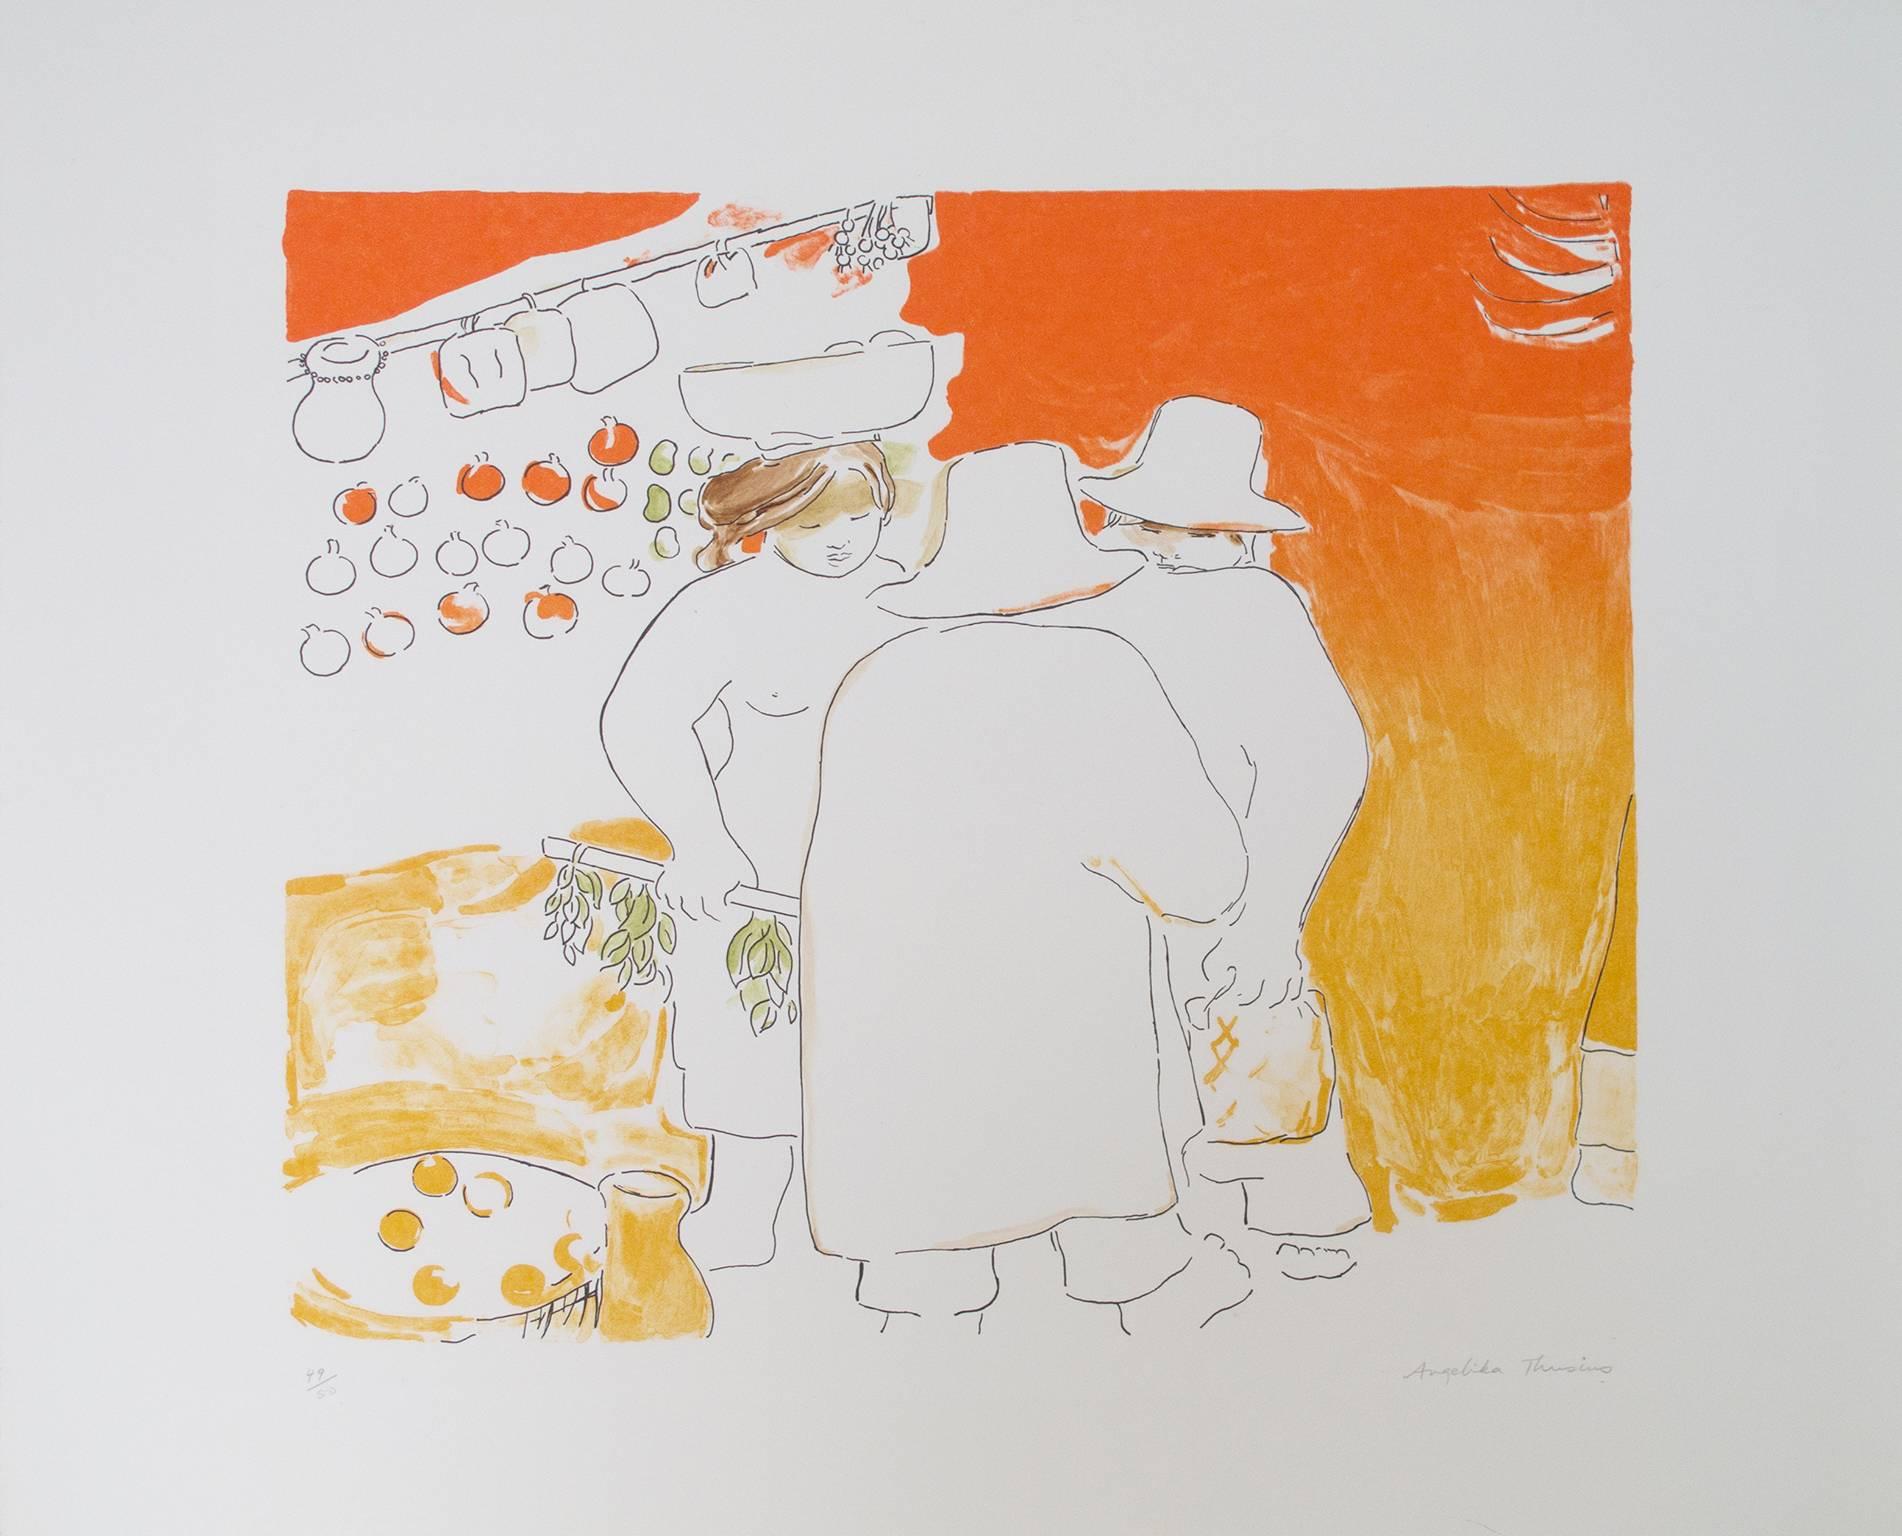 "Market Scene" is an original color lithograph by Angelika Thusius. It depicts three women at a market. Thusius uses contour lines and bright oranges and yellows to create this lithograph. It is signed in the lower right and editioned 49/50 lower